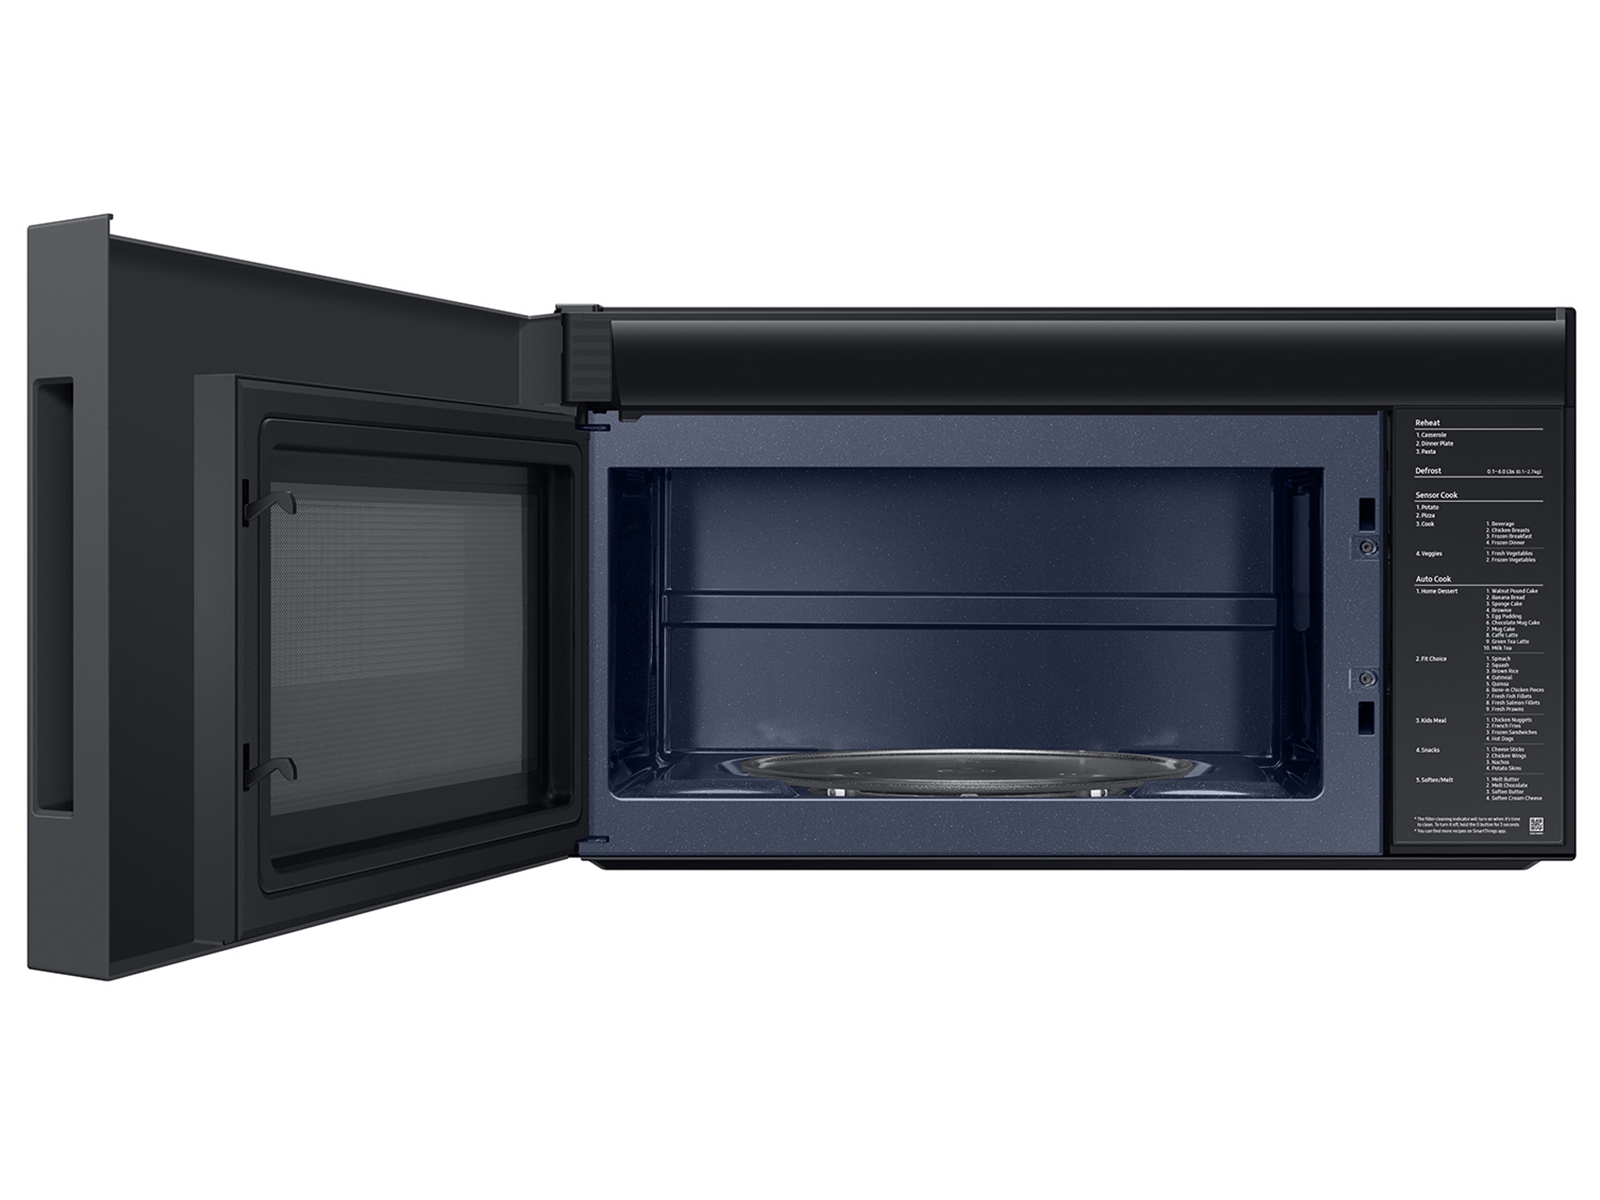 Thumbnail image of Bespoke 2.1 cu. ft. Over-the-Range Microwave with Edge to Edge Glass Display in White Glass